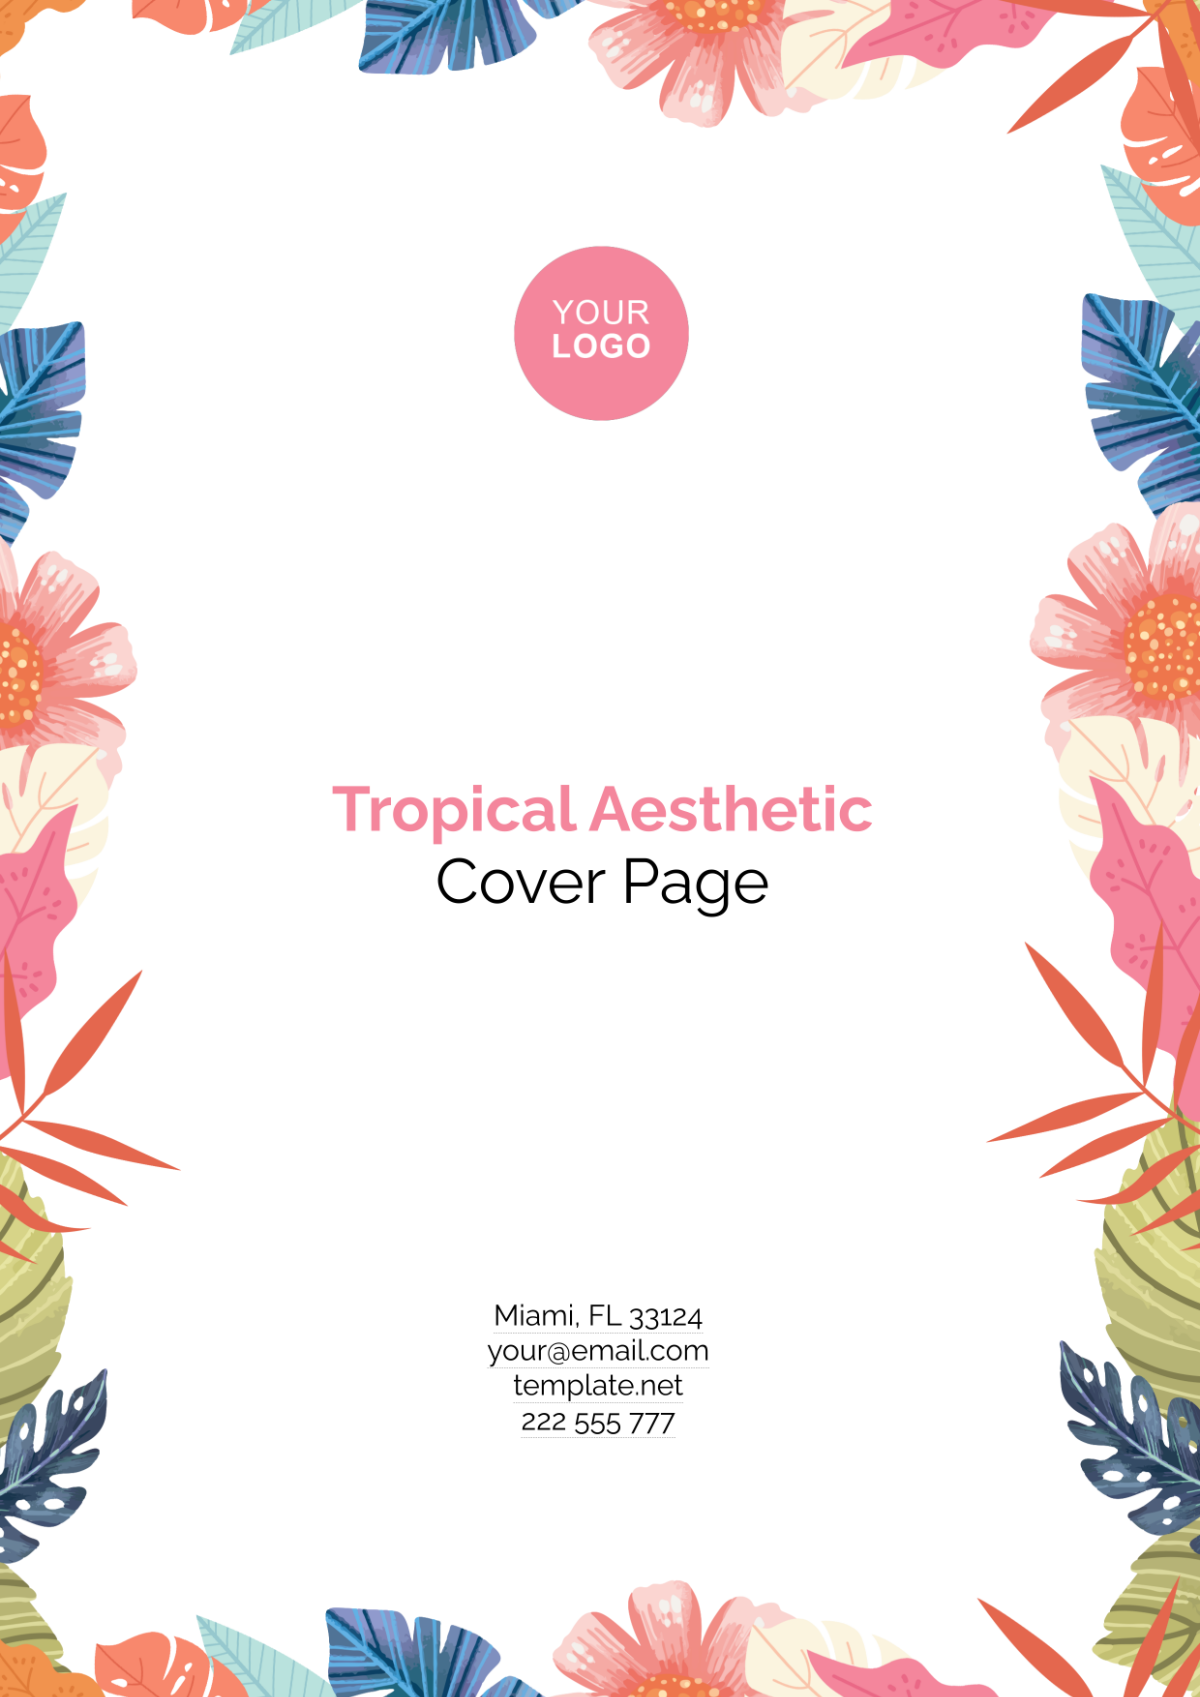 Tropical Aesthetic Cover Page Template